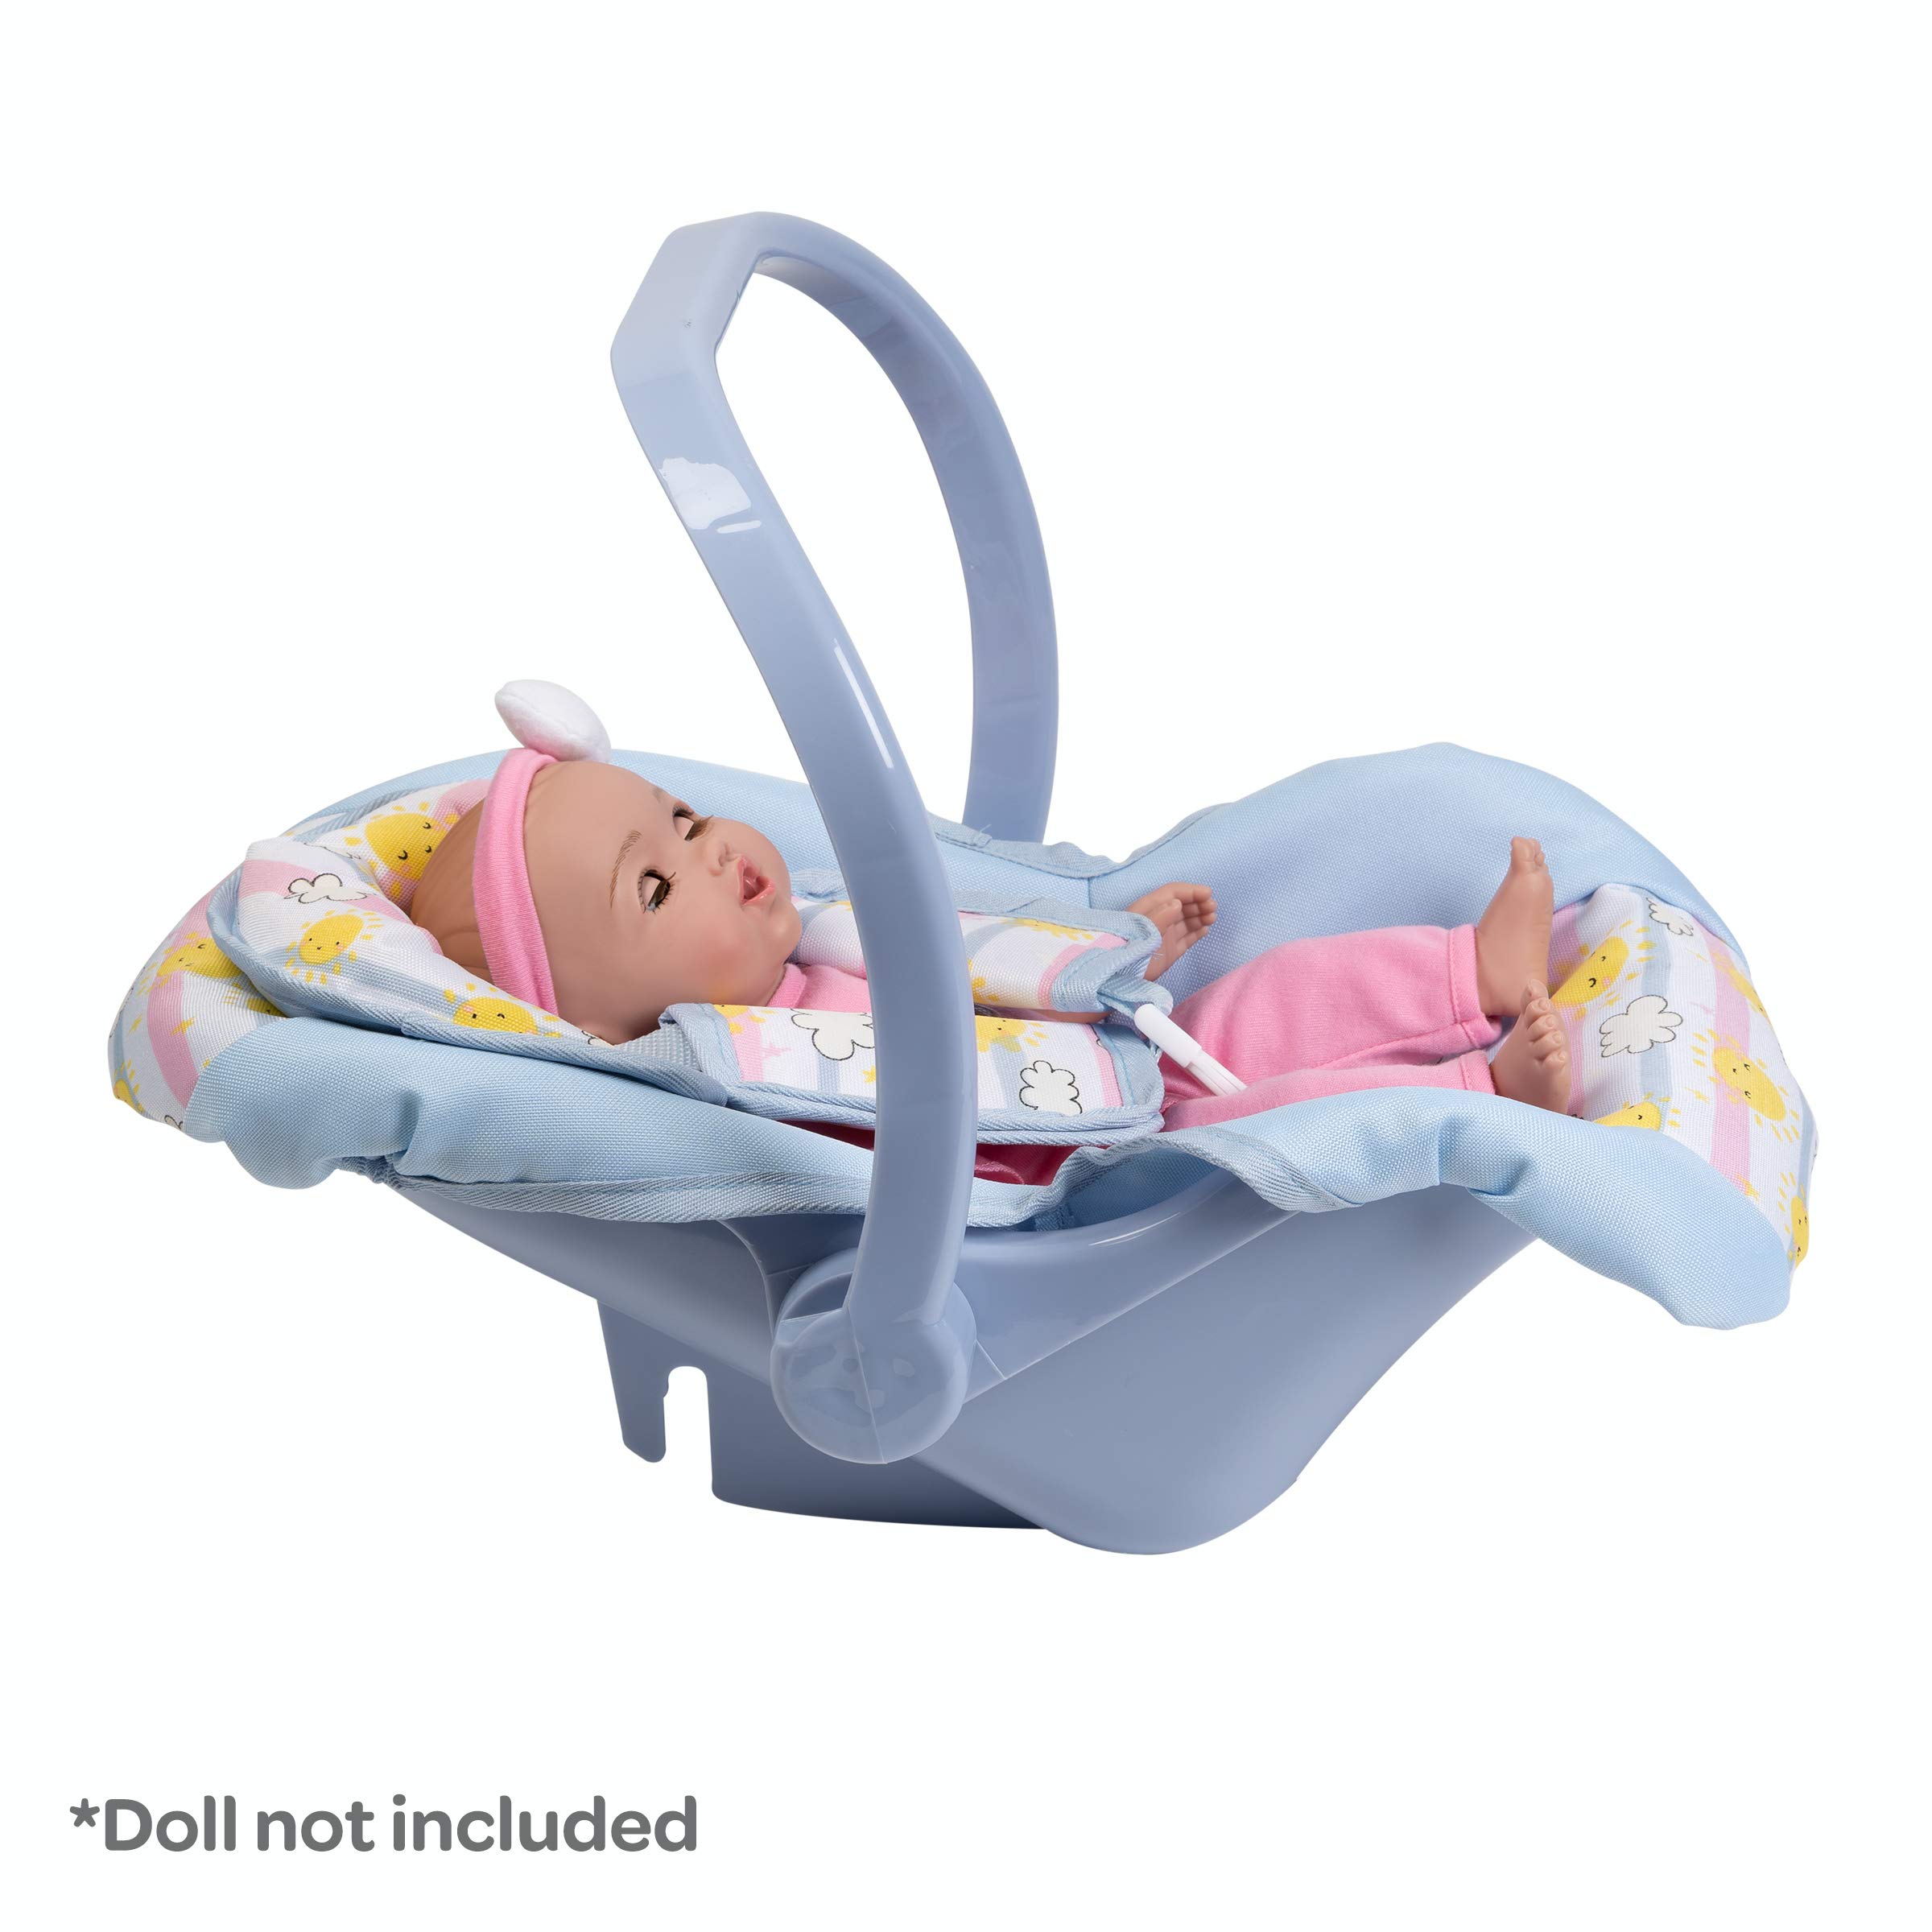 Adora Baby Doll Car Seat Carrier with Color Changing Sunny Days Print, Fits Dolls Up to 20 Inches